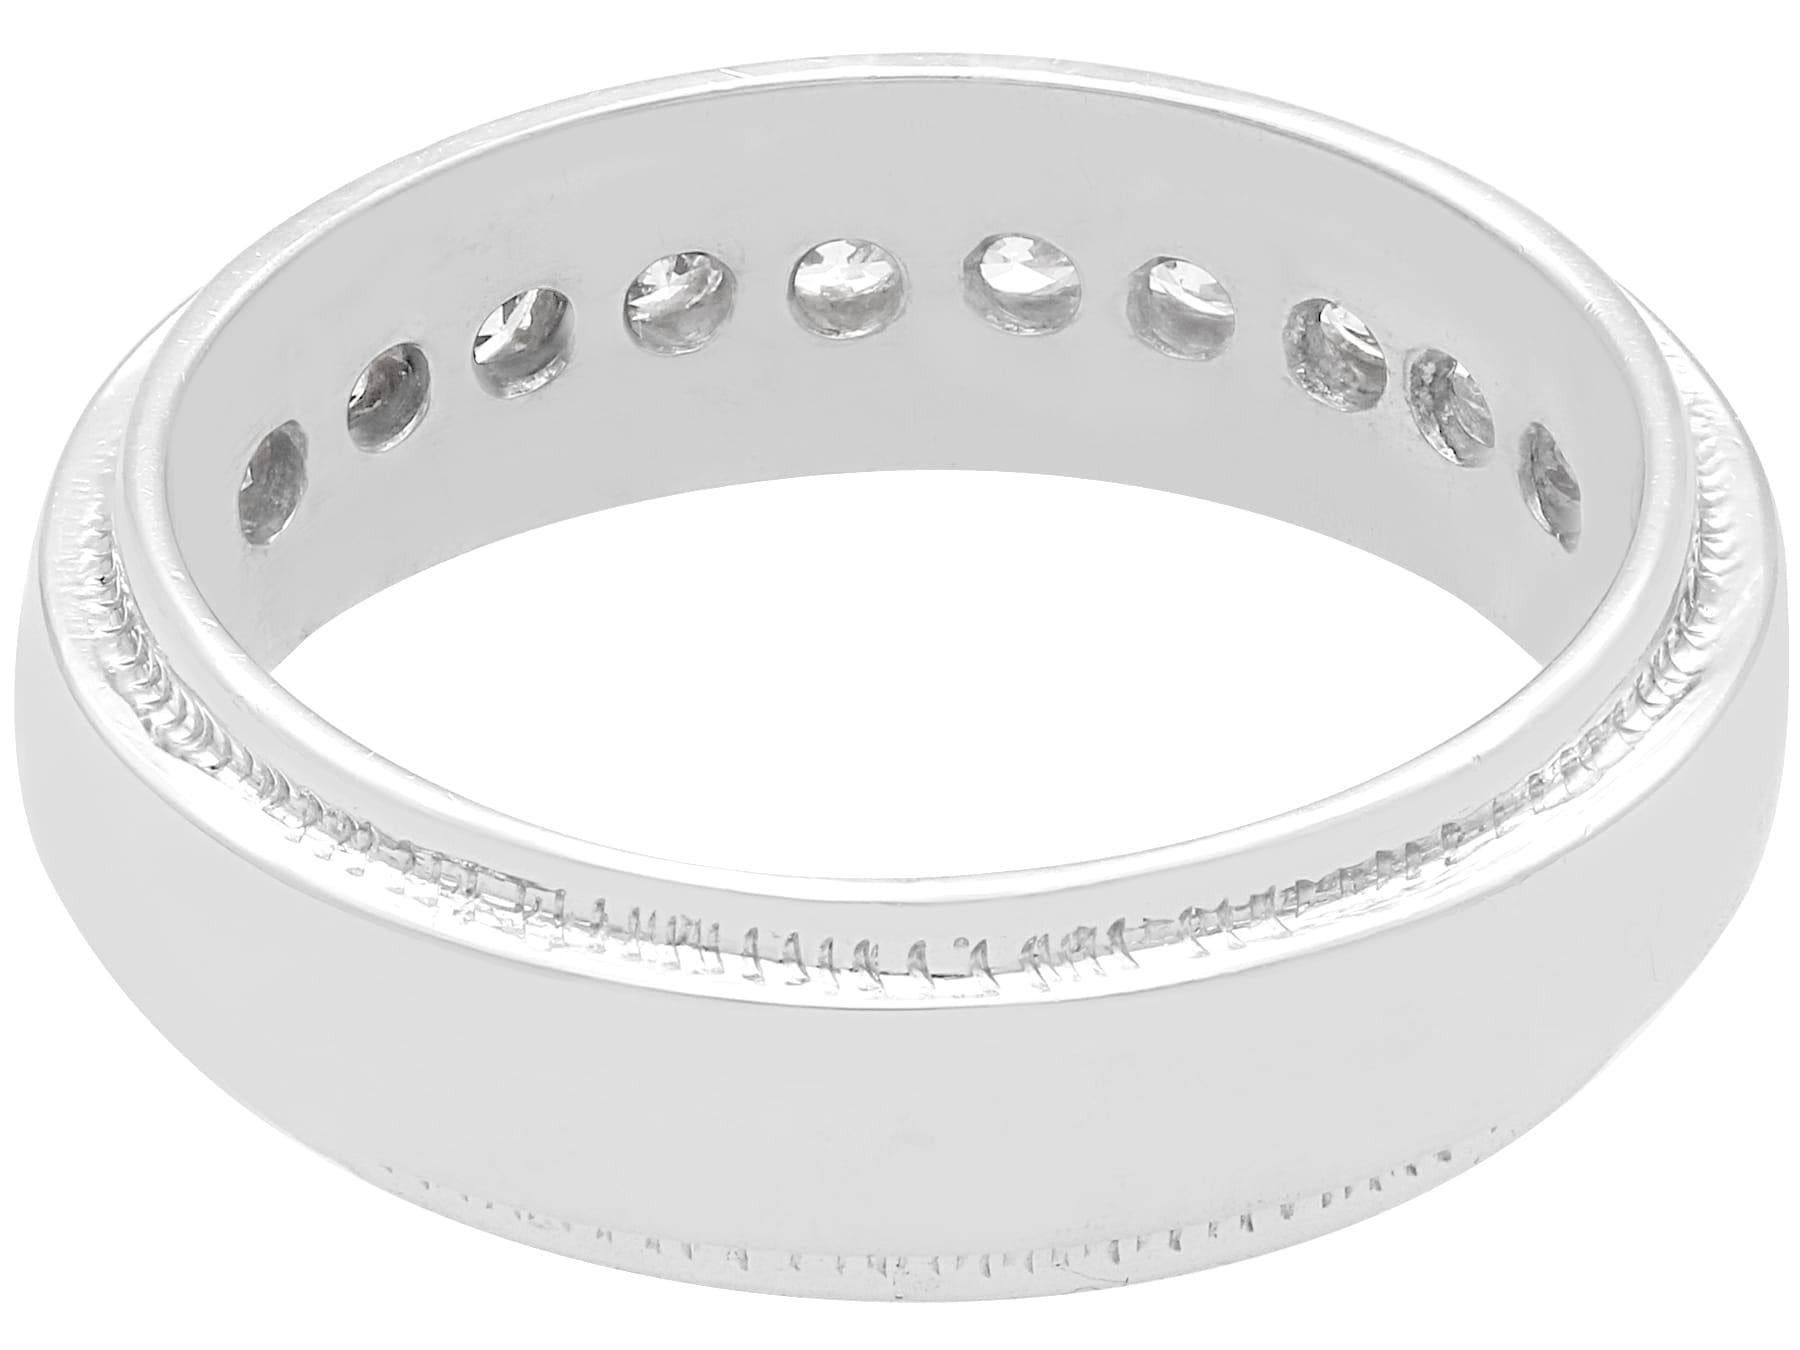 Vintage 1.10 Carat Diamond White Gold Half Eternity Ring In Excellent Condition For Sale In Jesmond, Newcastle Upon Tyne